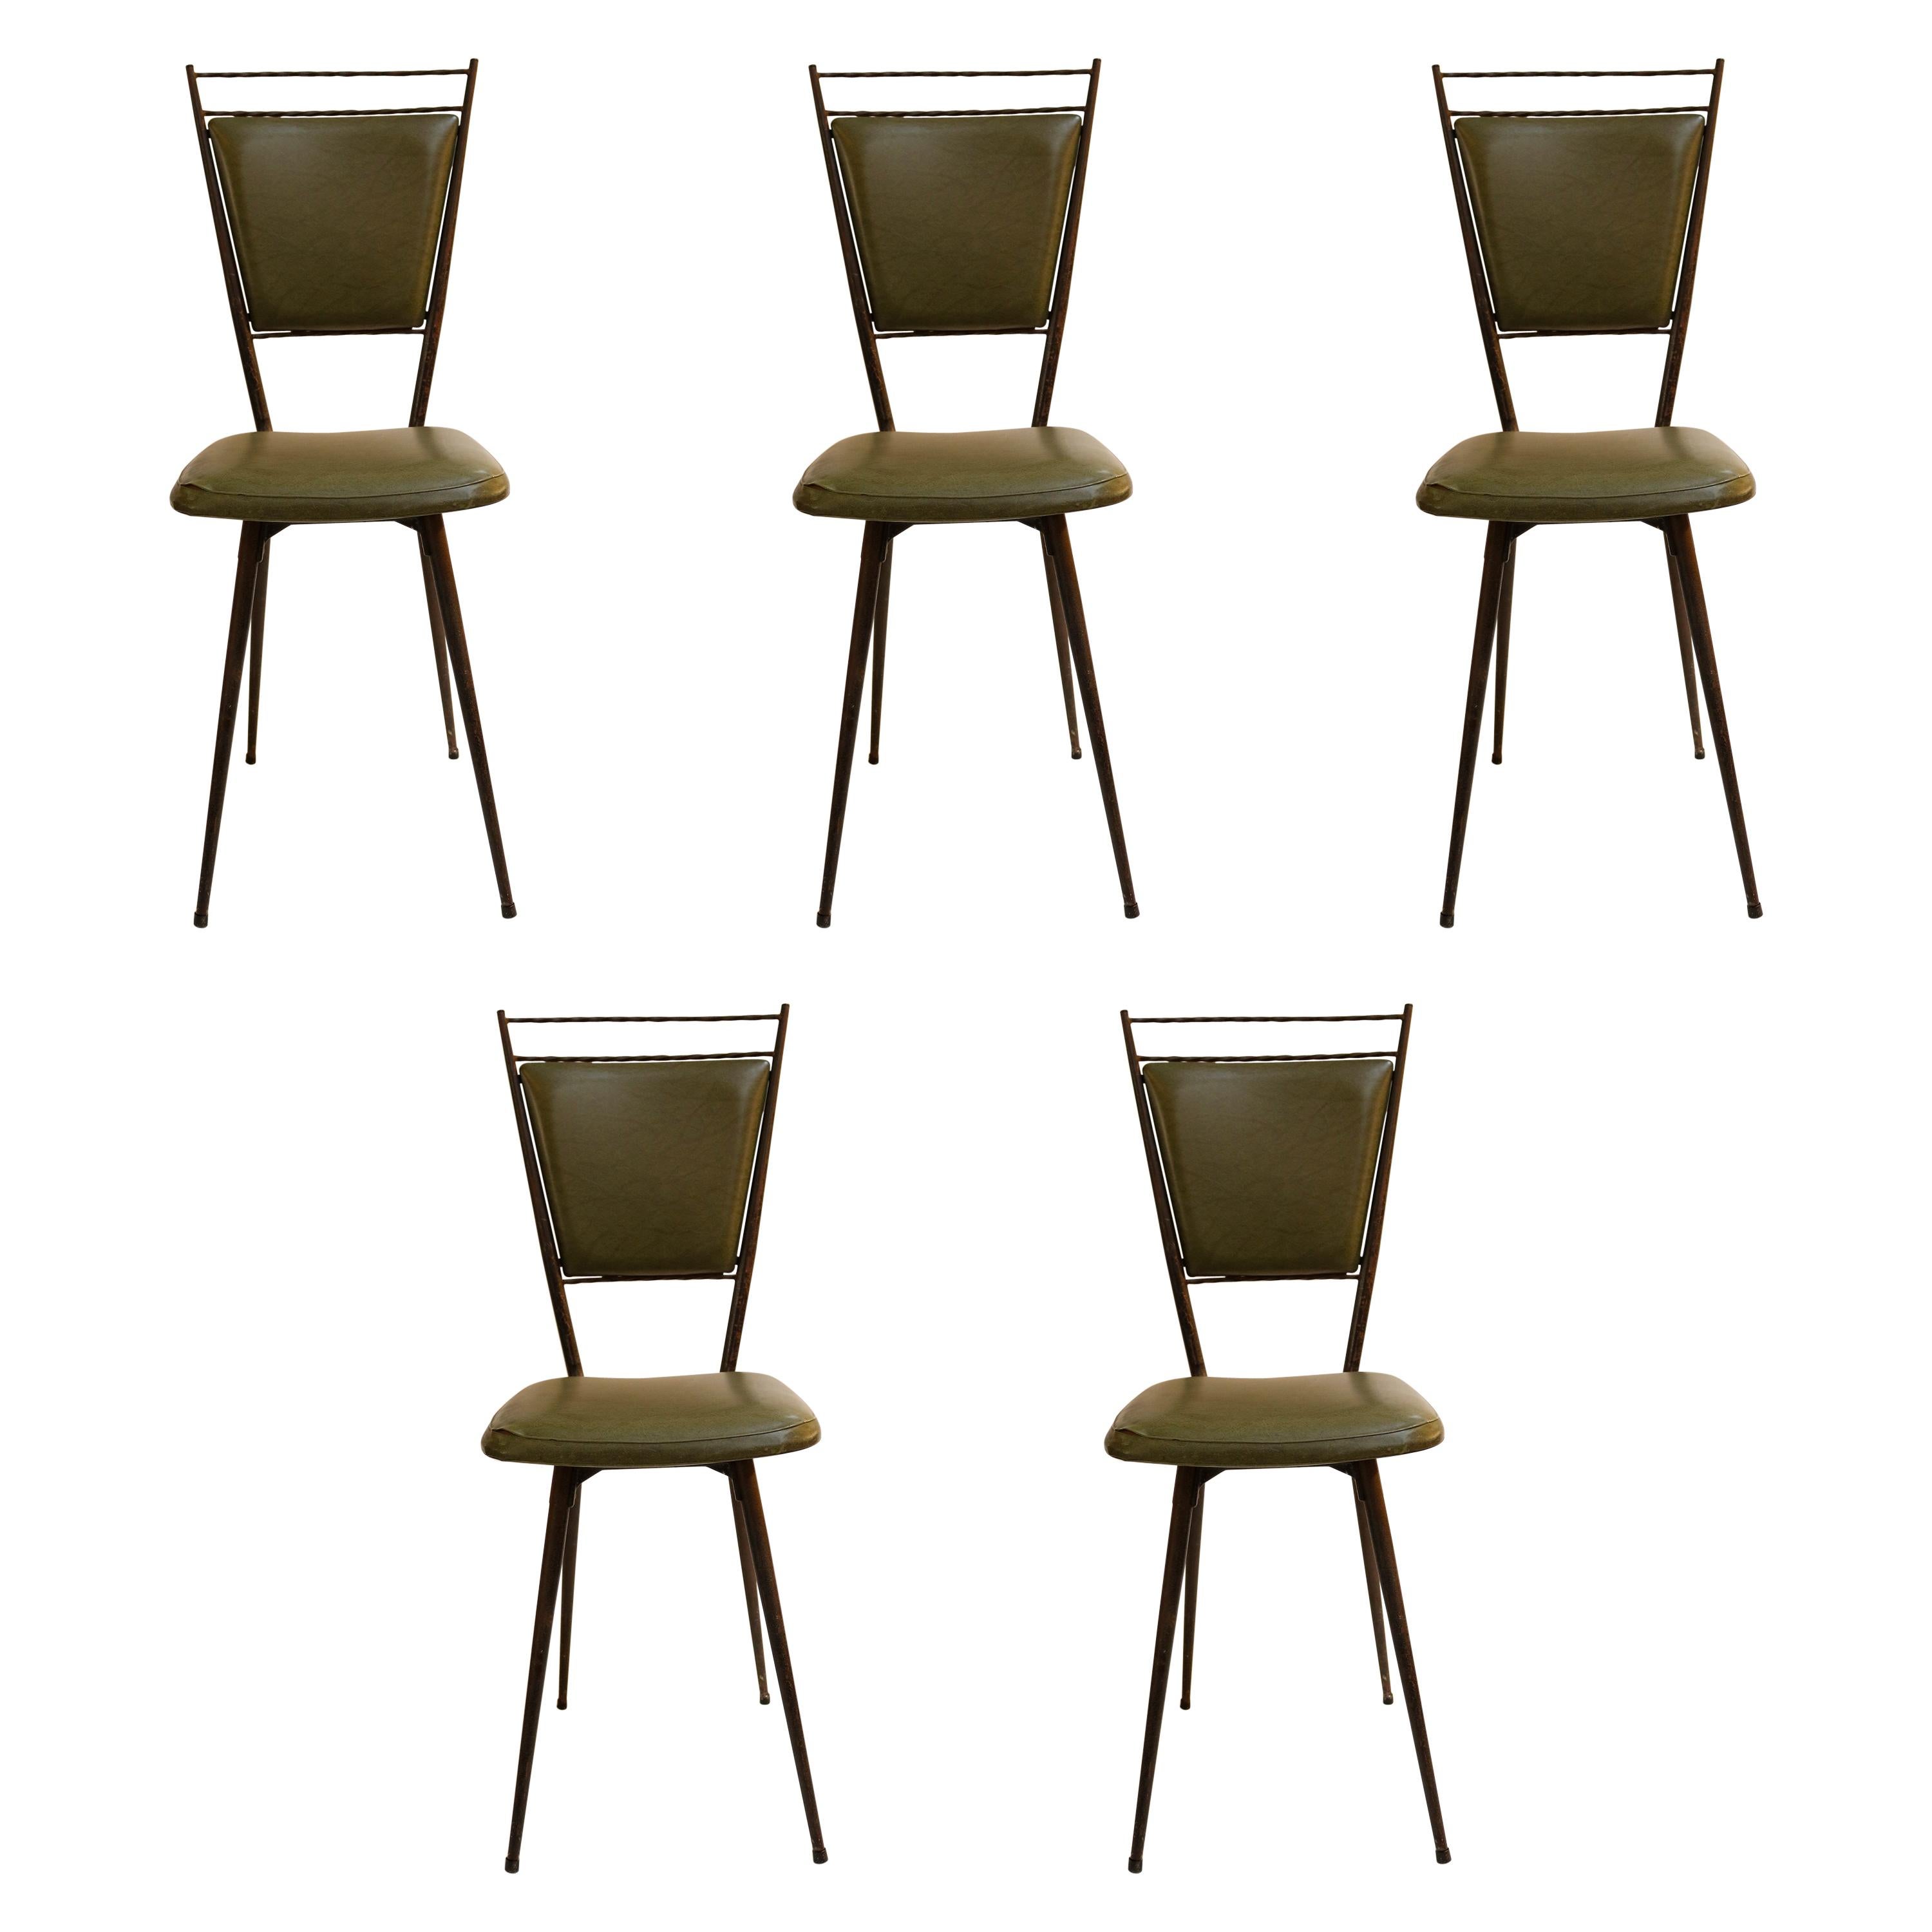 Set of 5 French 1950s Wrought Iron Chairs